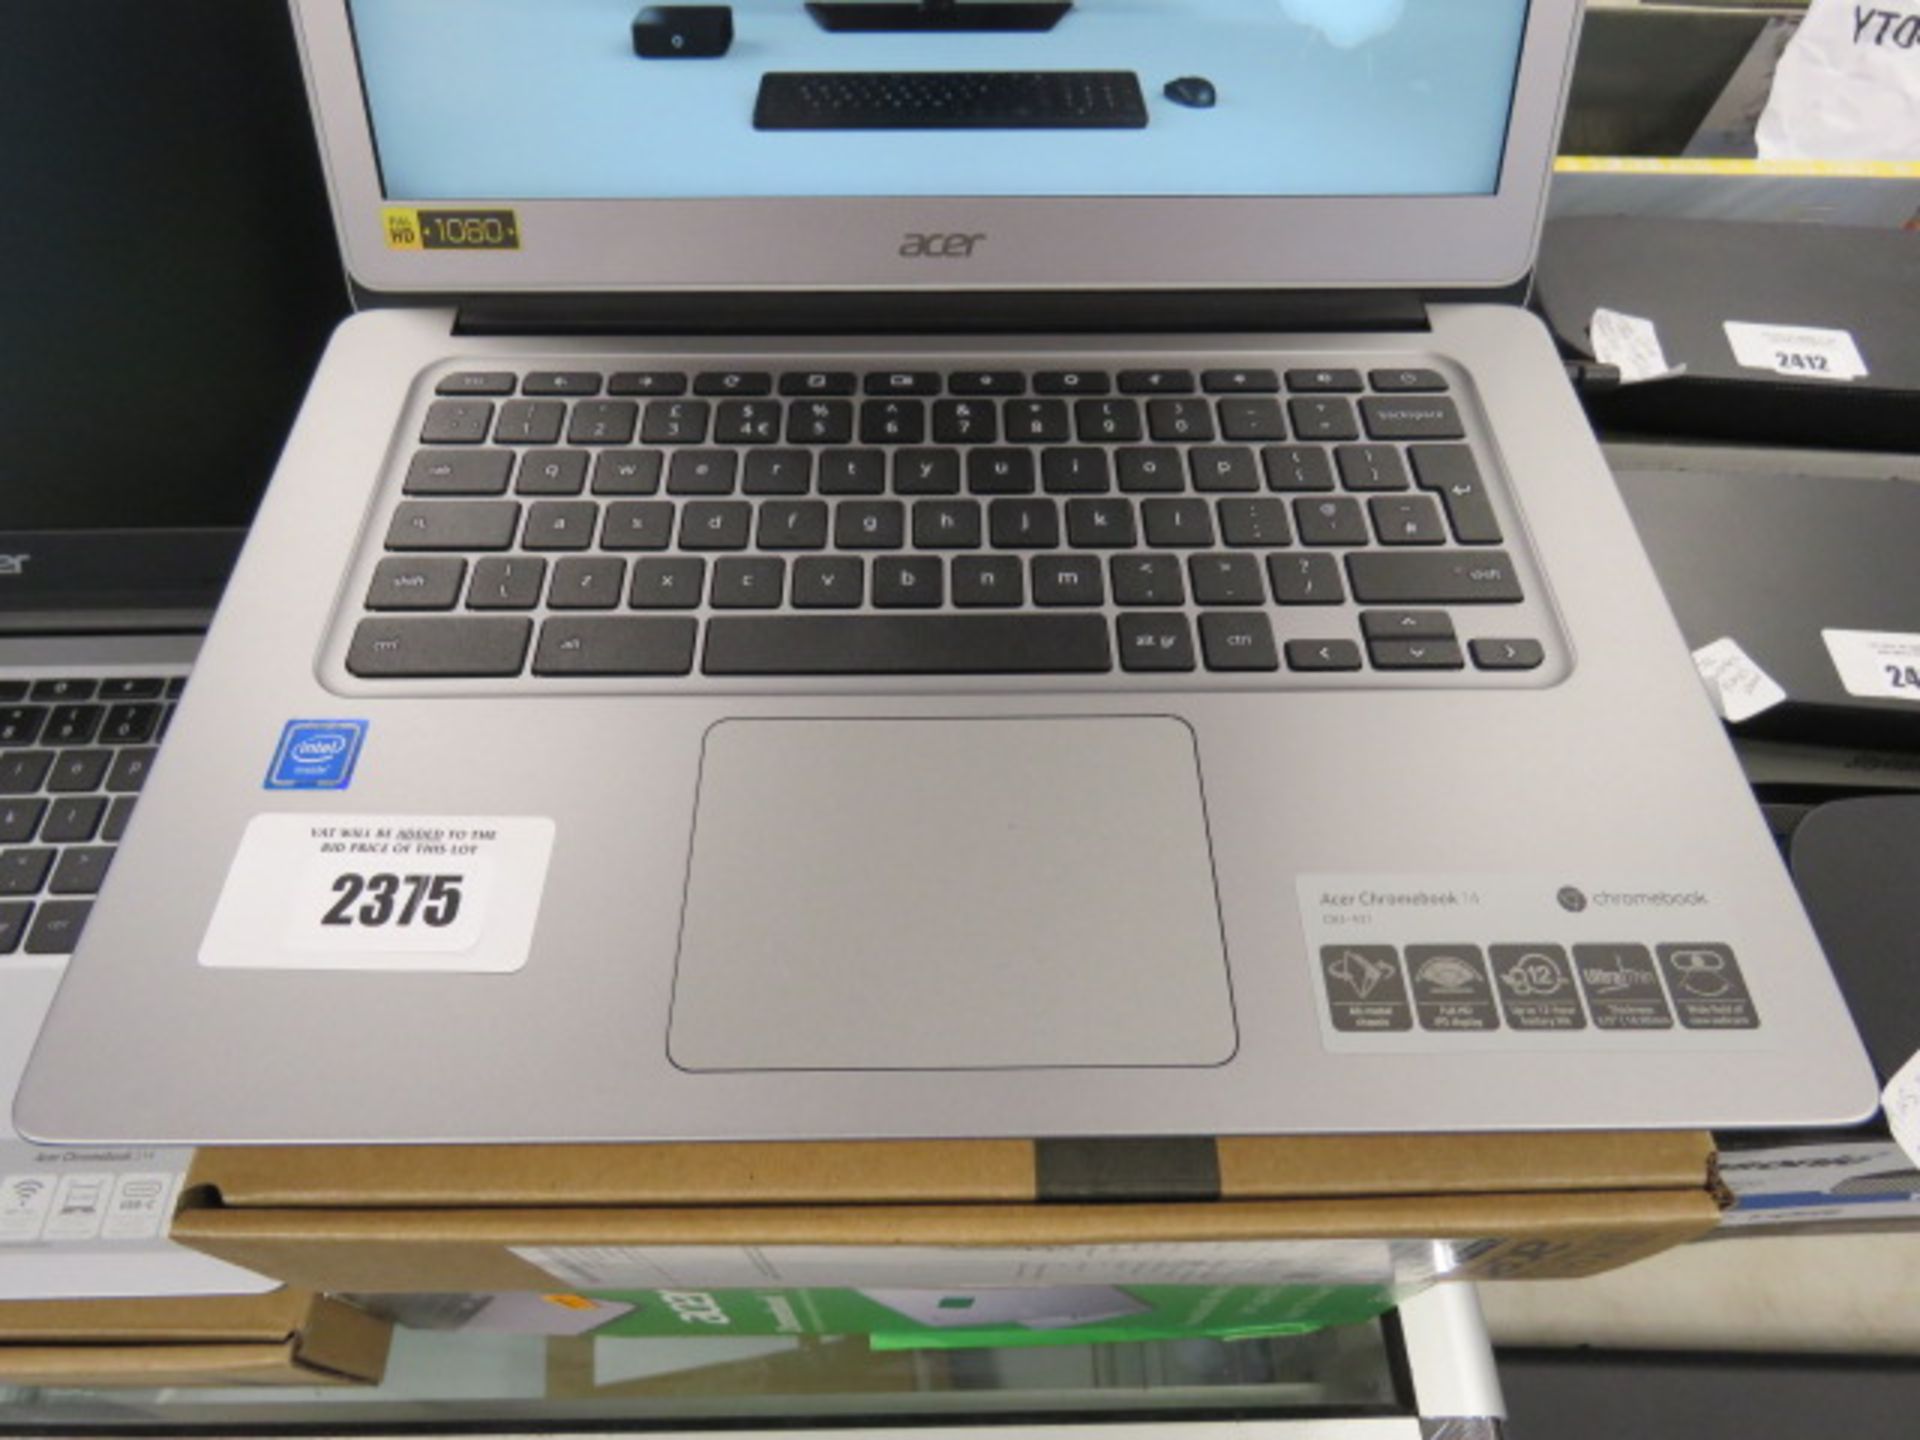 Acer Chromebook 14 laptop, intel processor, 4gb ram, 32gb storage, includes power supply, protective - Image 3 of 3